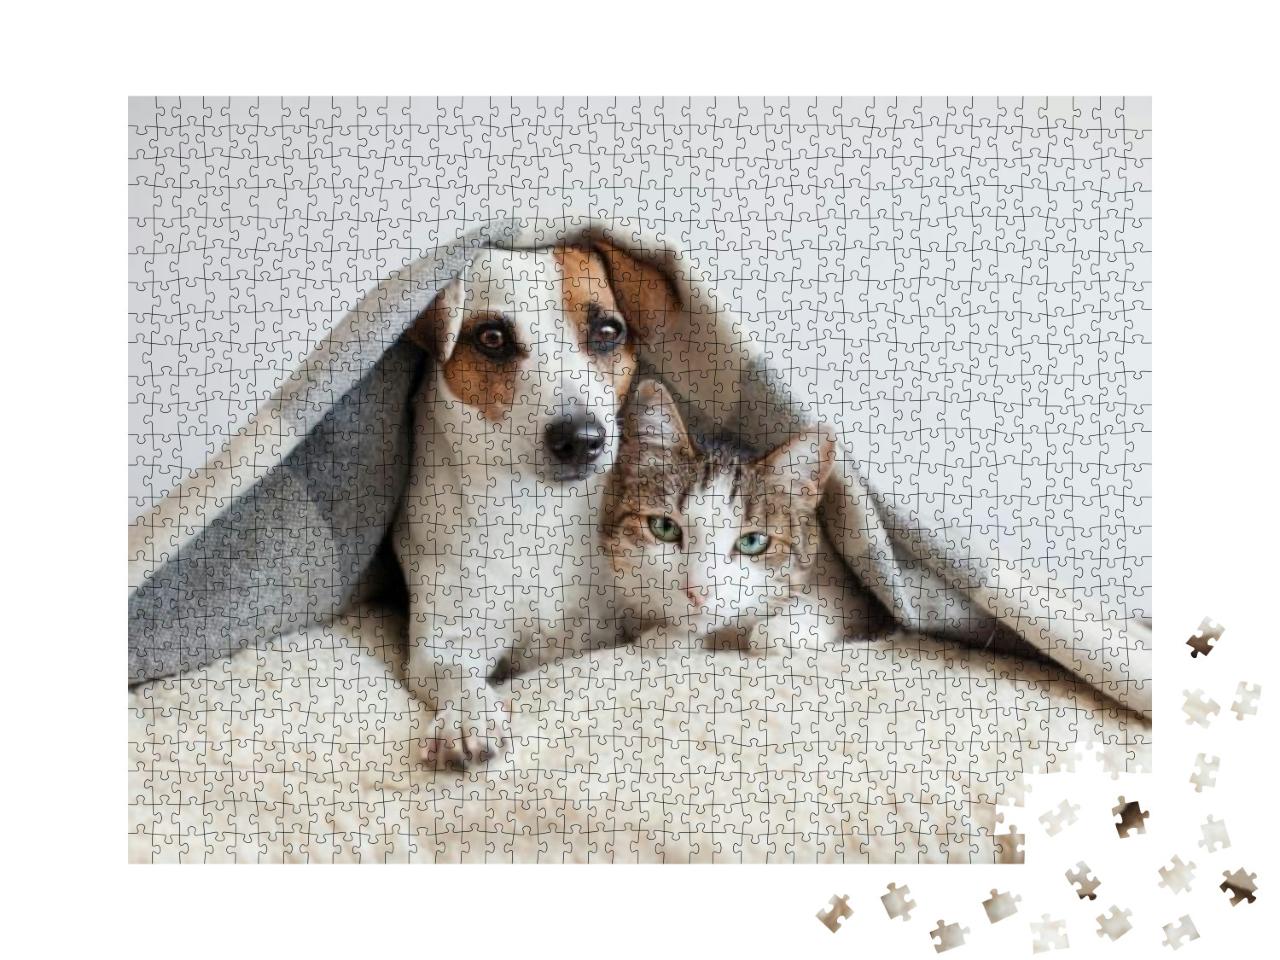 Dog & Cat Together. Dog Hugs a Cat Under the Rug At Home... Jigsaw Puzzle with 1000 pieces